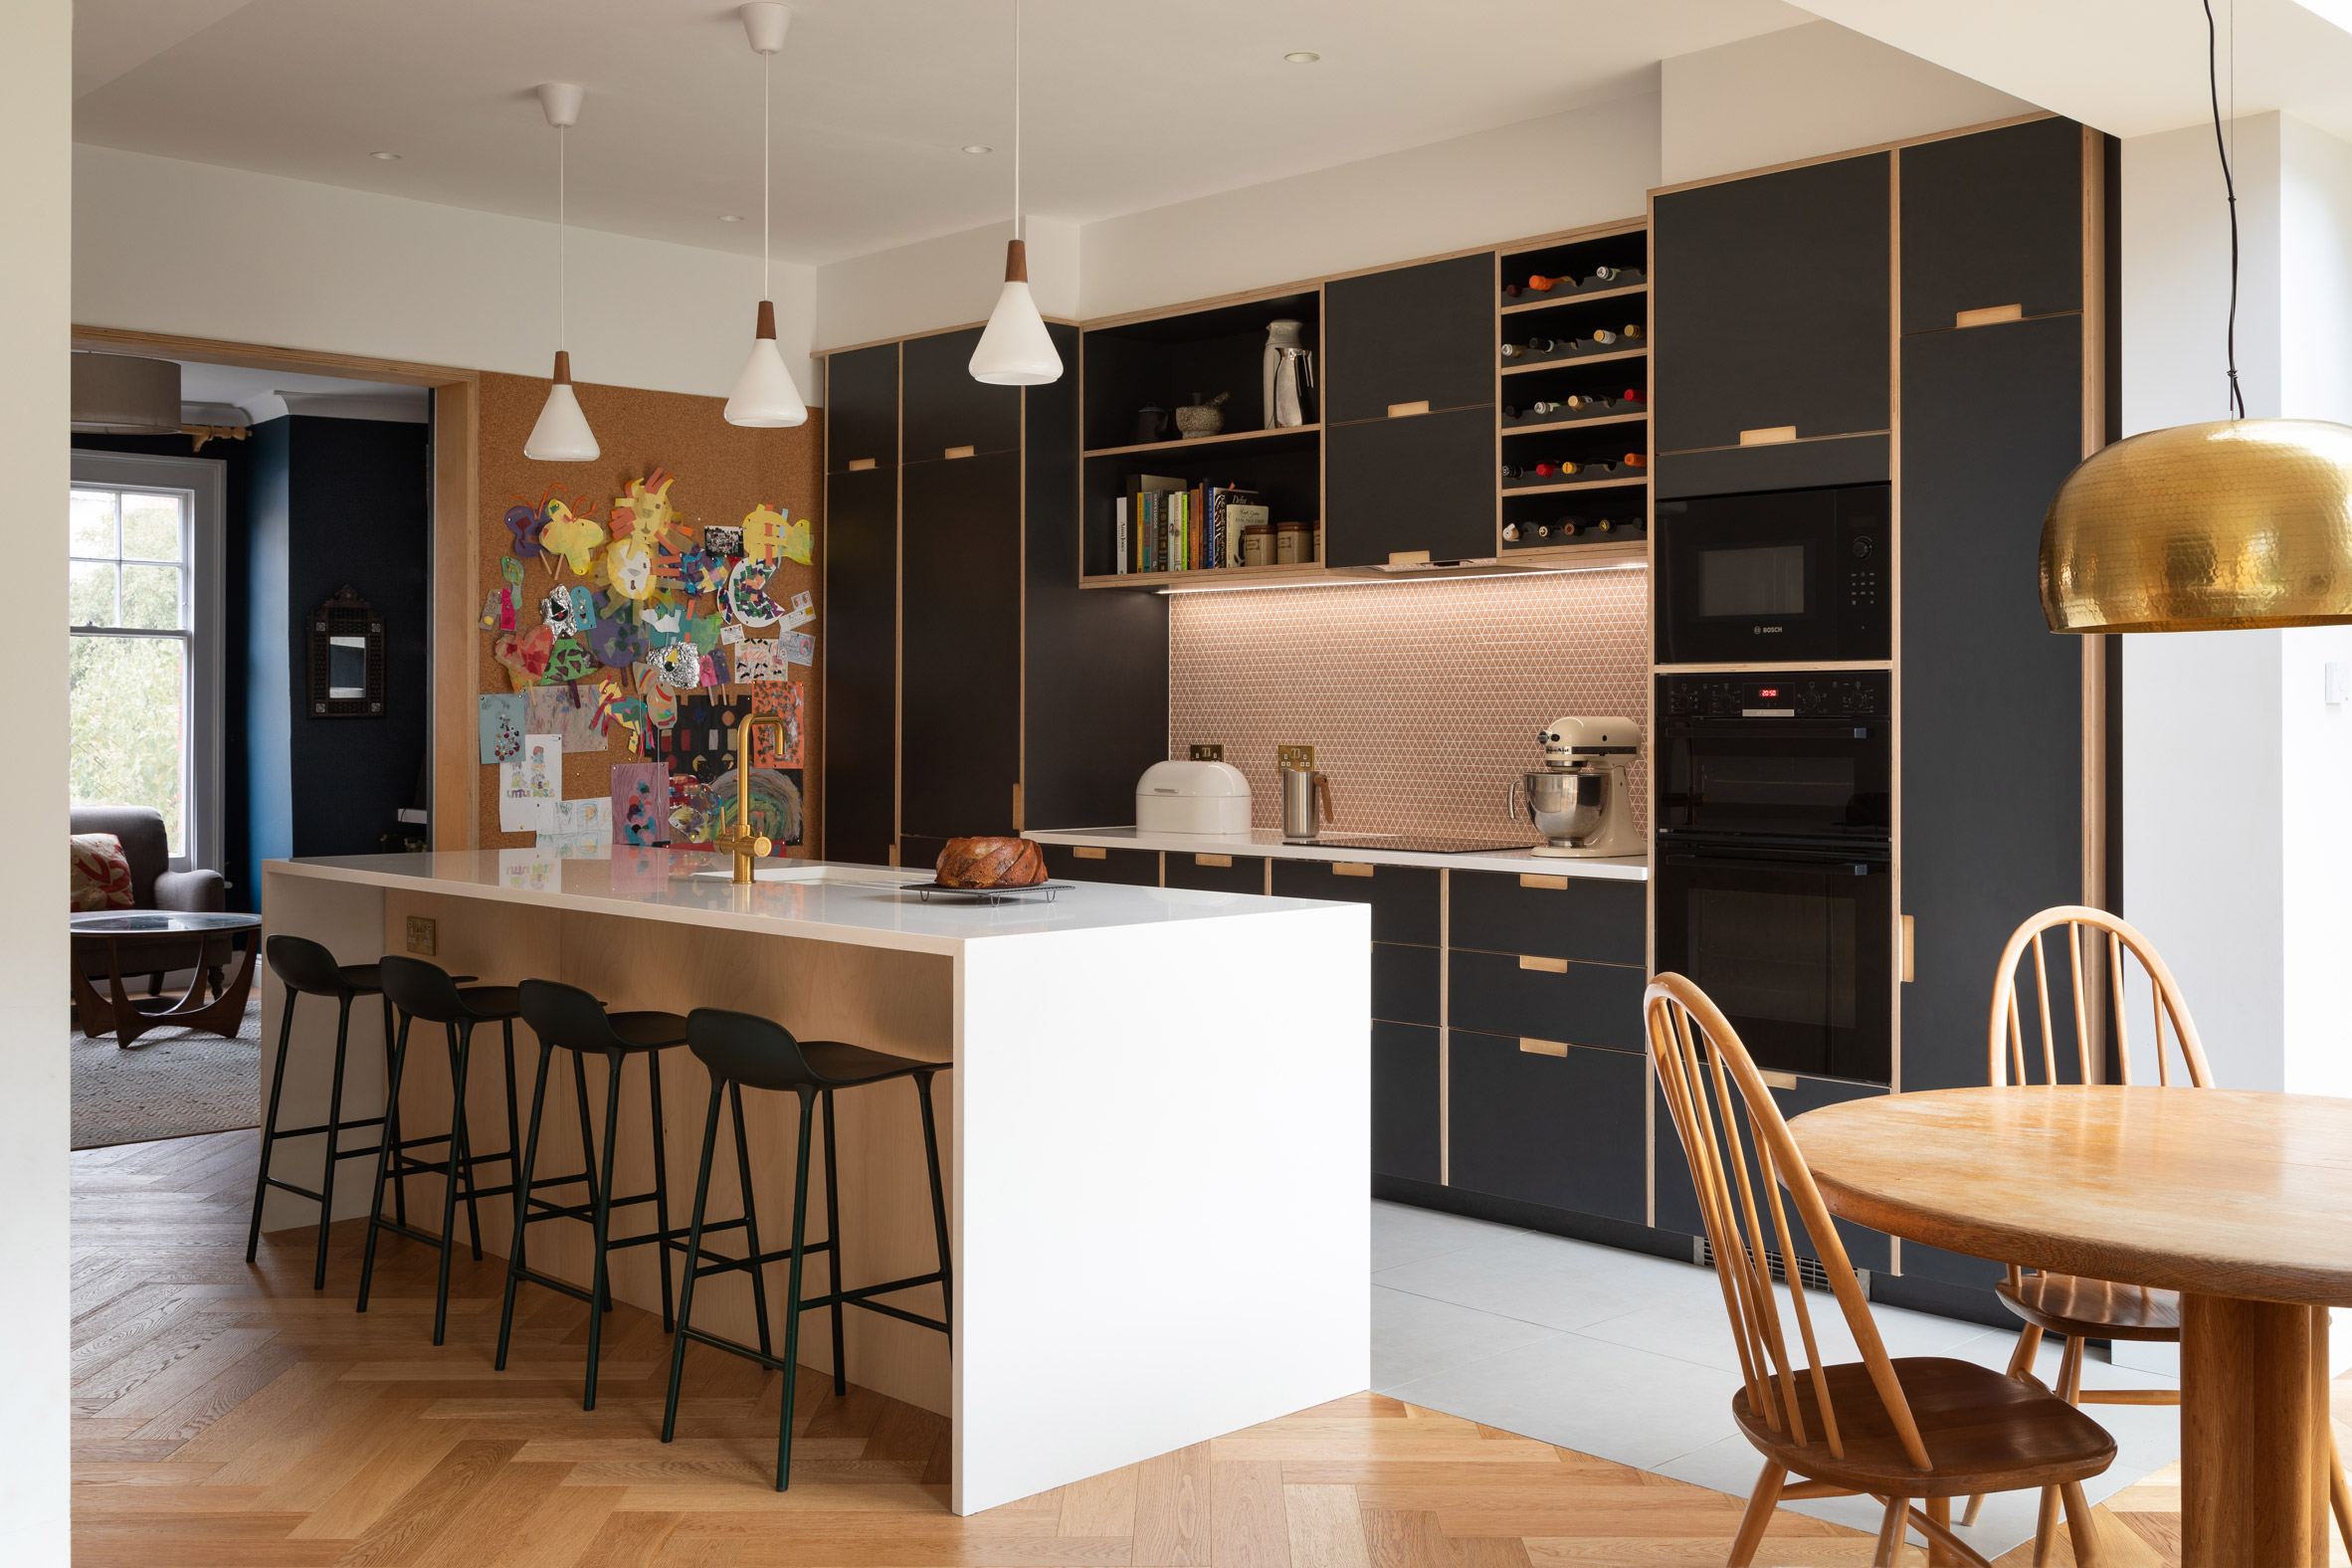 The Charred House kitchen by Rider Stirland Architects in London